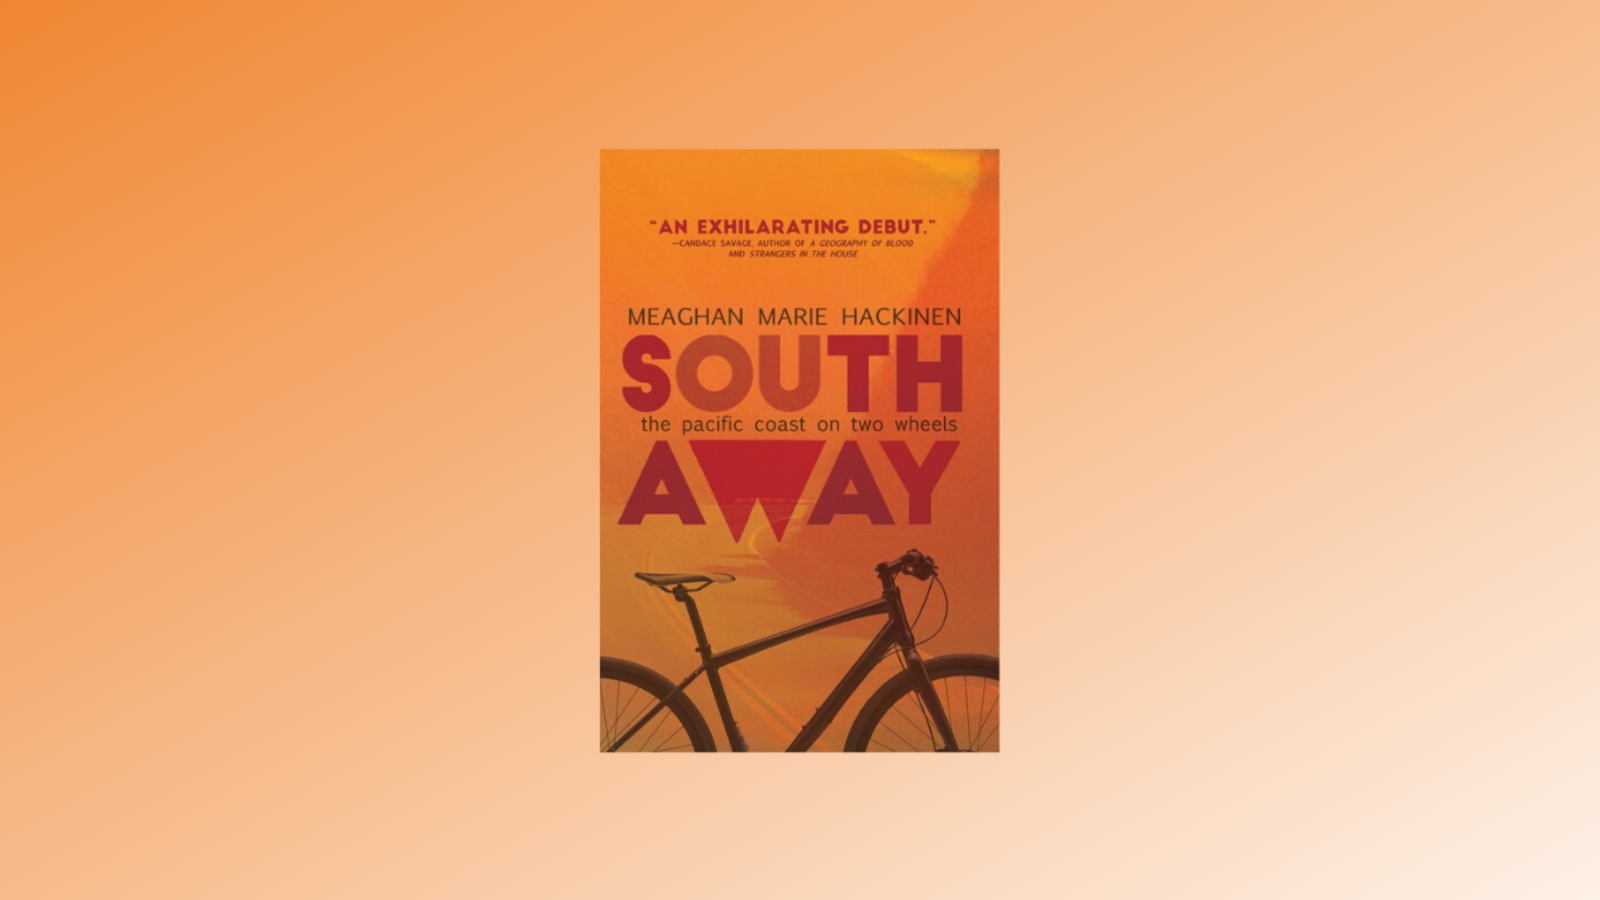 WIN: South Away by Meaghan Hackinen